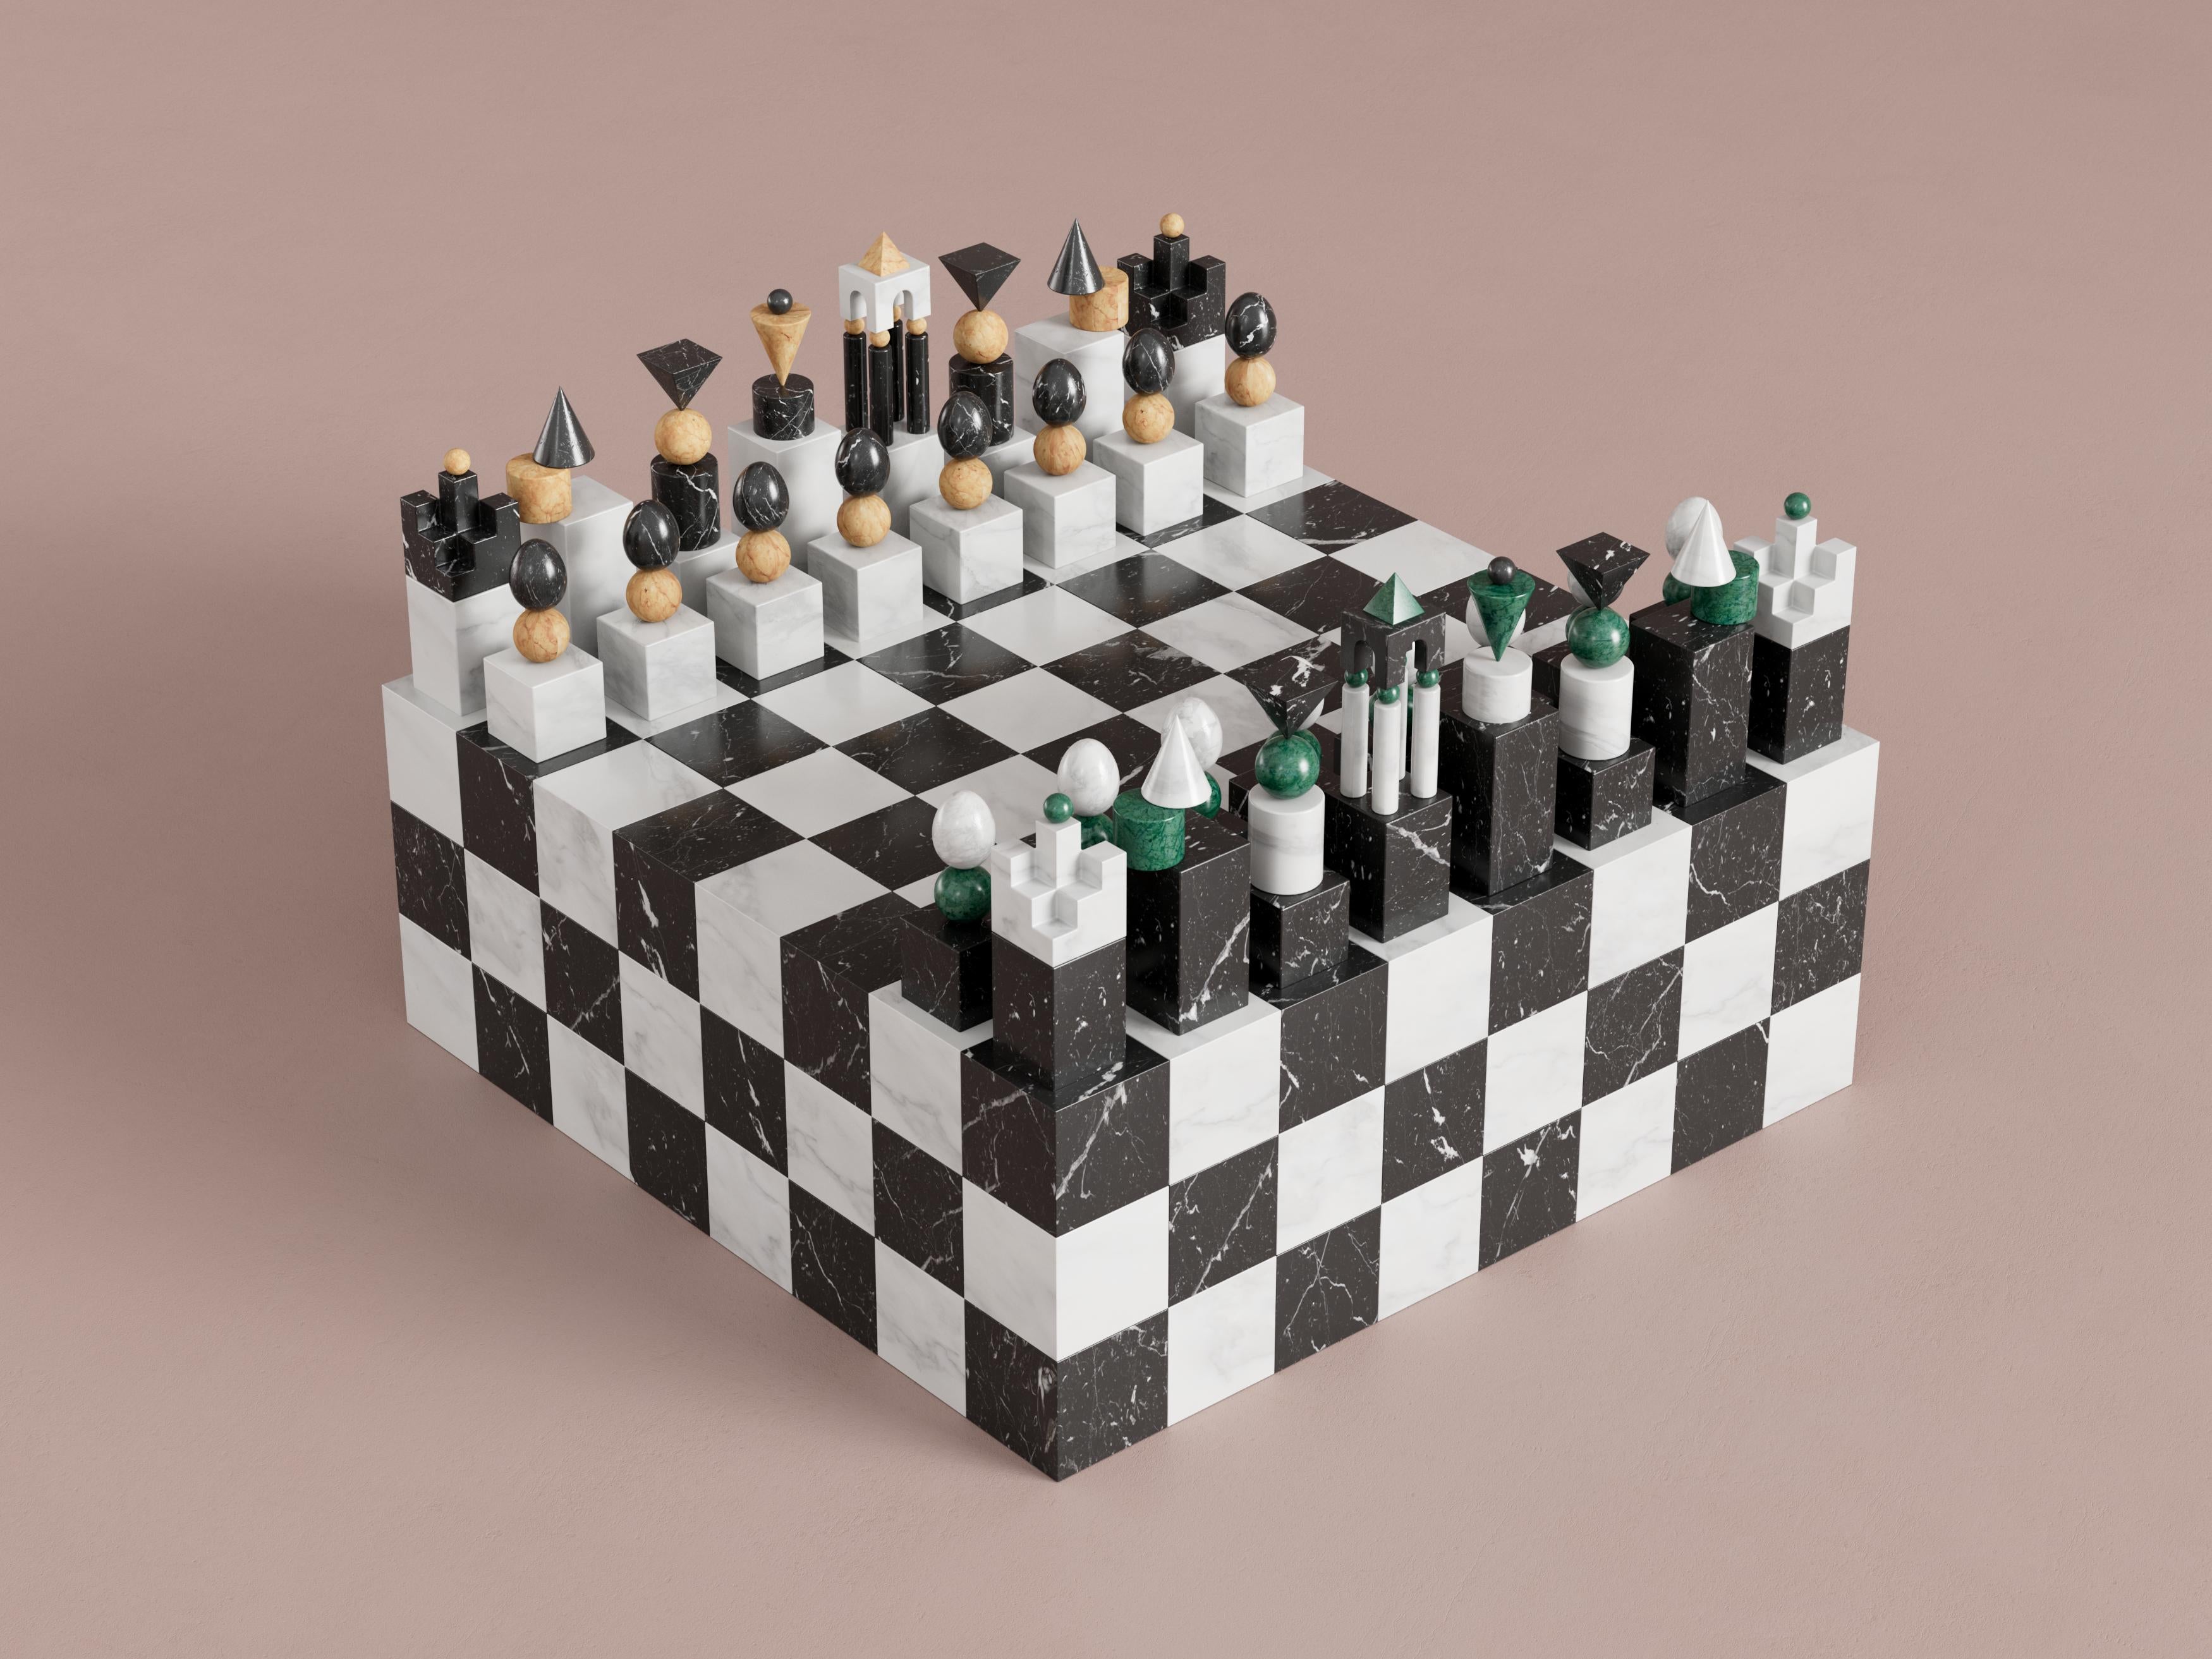 Chess Coffee Table 1 by Pilar Zeta
Limited Edition of 20 + 2AP pieces.
Materials: Marble, aluminum, metal.
Dimensions: W 100 x D 100 x H 32 cm.
Weight: 150 kg.

Marble and aluminium coffee table (32 green & beige pieces). Marble and metal